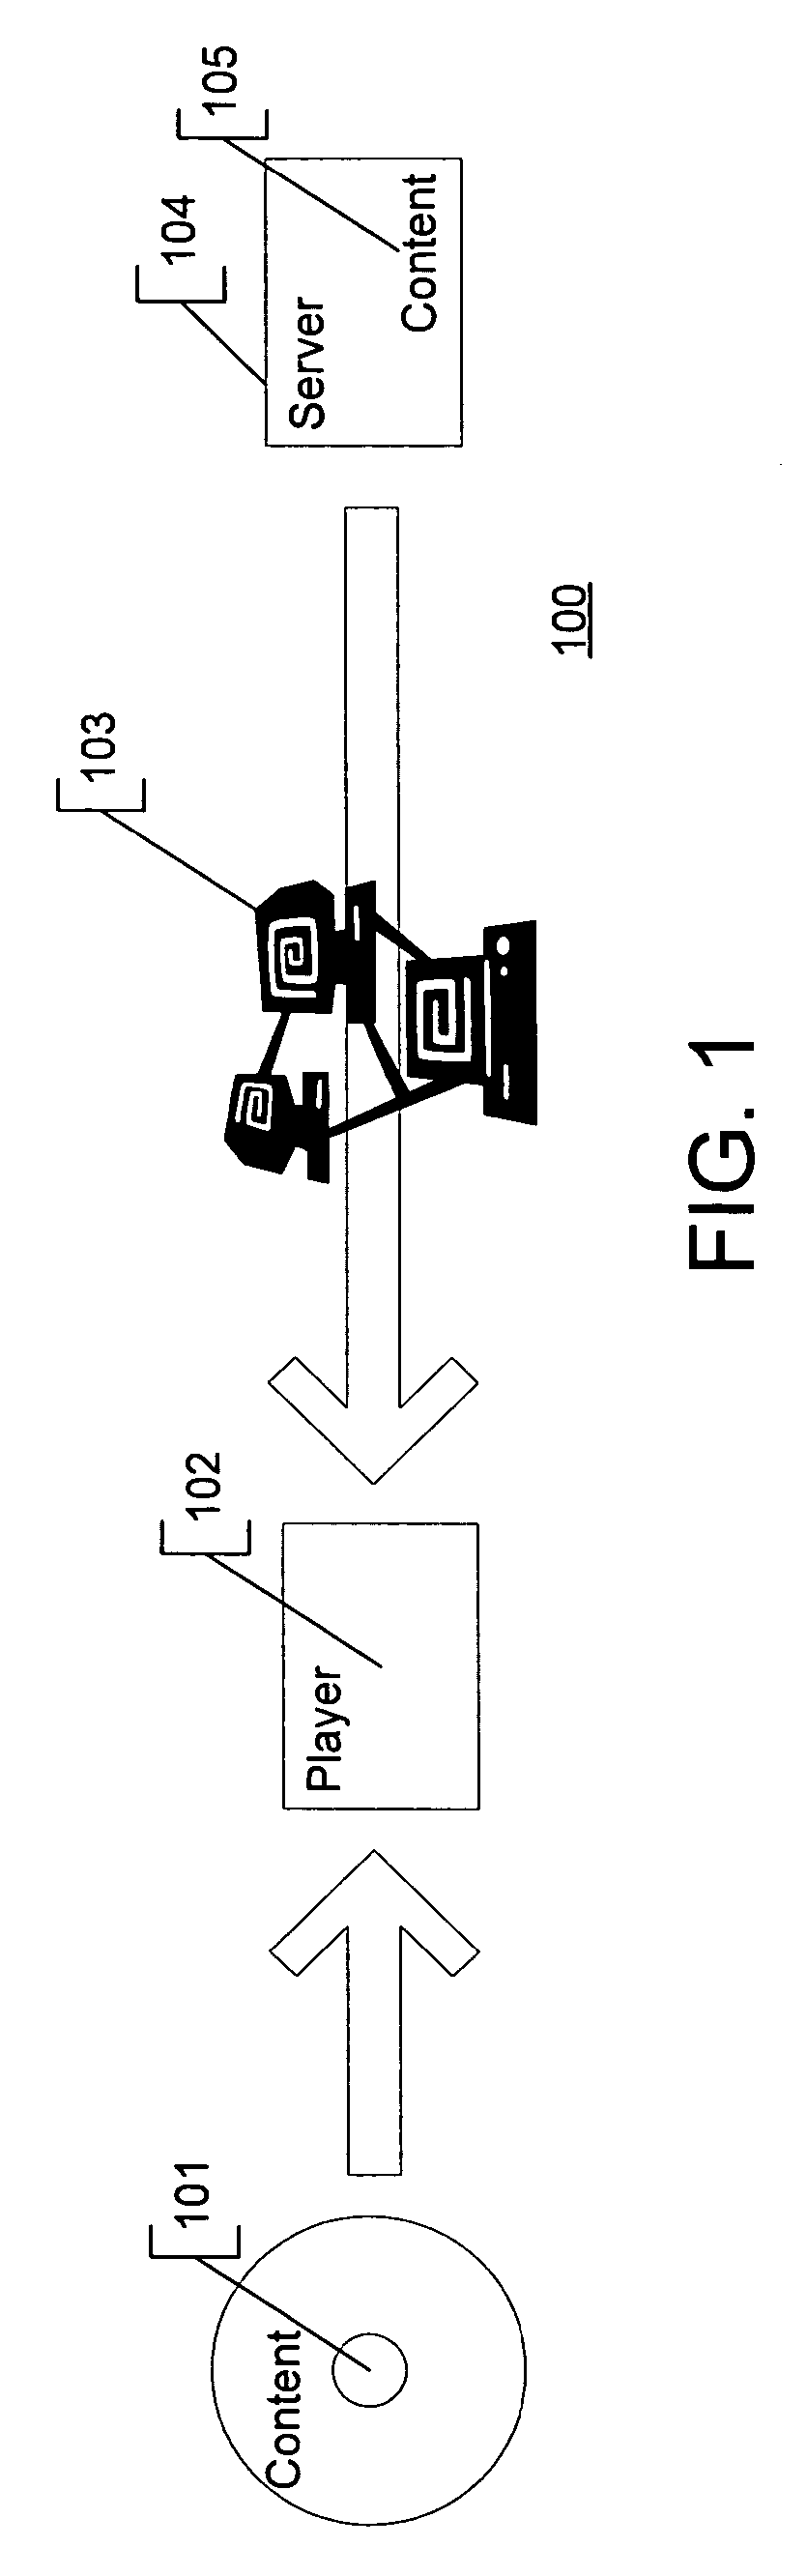 System and method for digital rights management using advanced copy with issue rights, and managed copy tokens